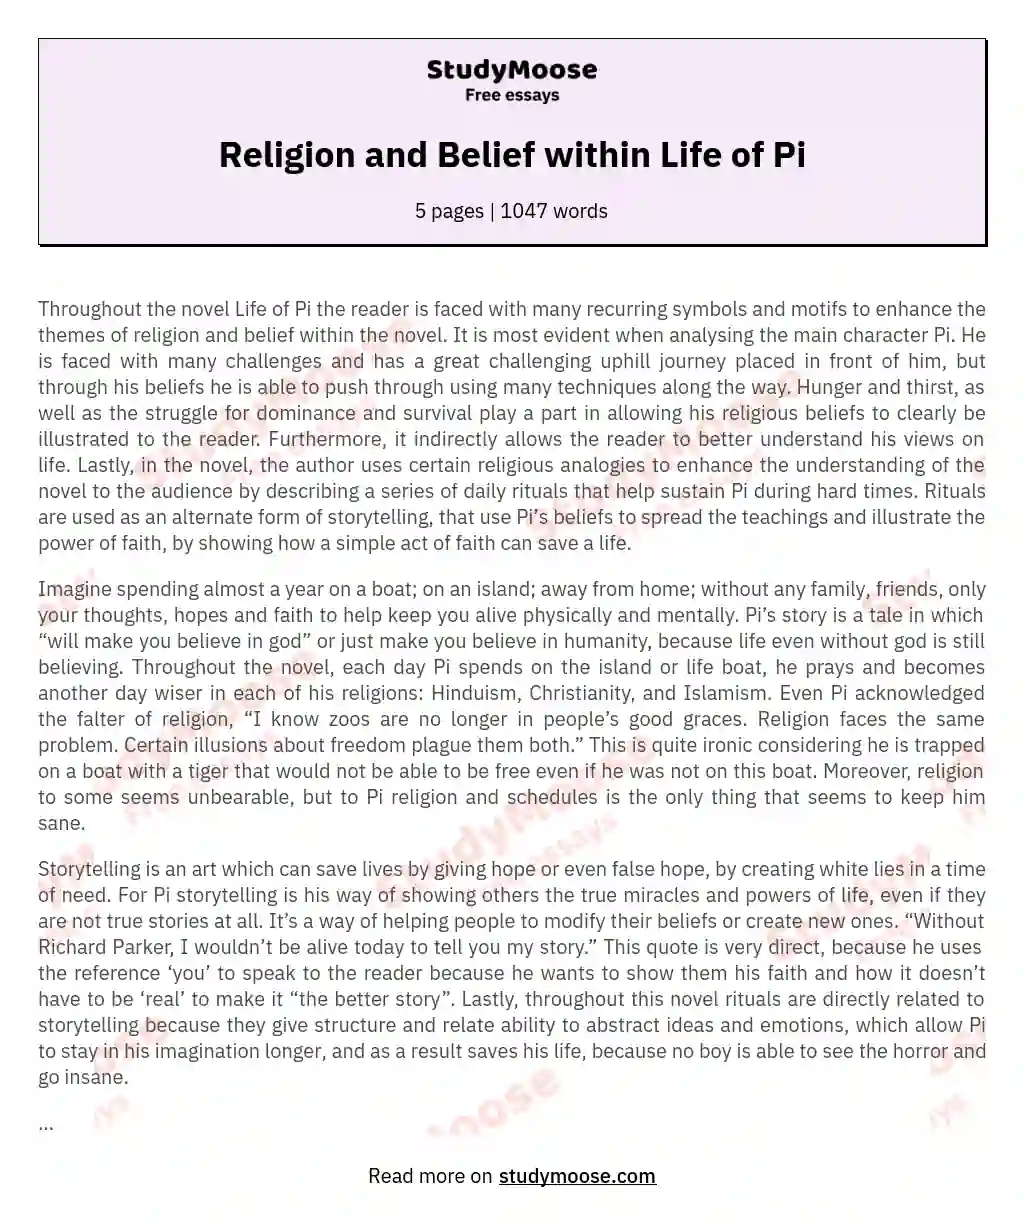 Religion and Belief within Life of Pi essay